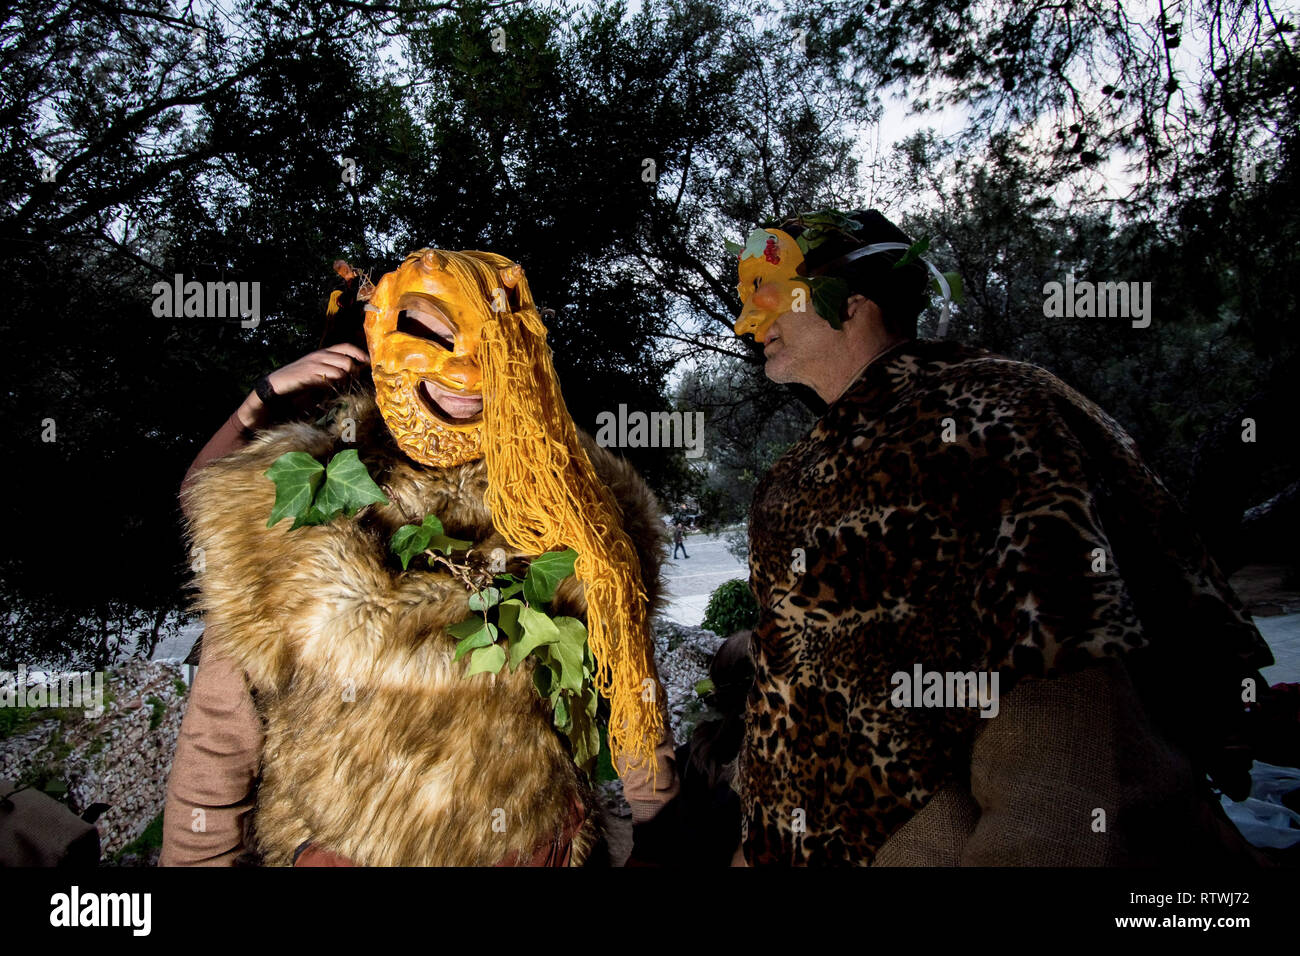 Participants are seen dressed up during the Falliforia or Fallagogia, an ancient Greek festival honoring the god Dionysus with orgiastic character. Stock Photo